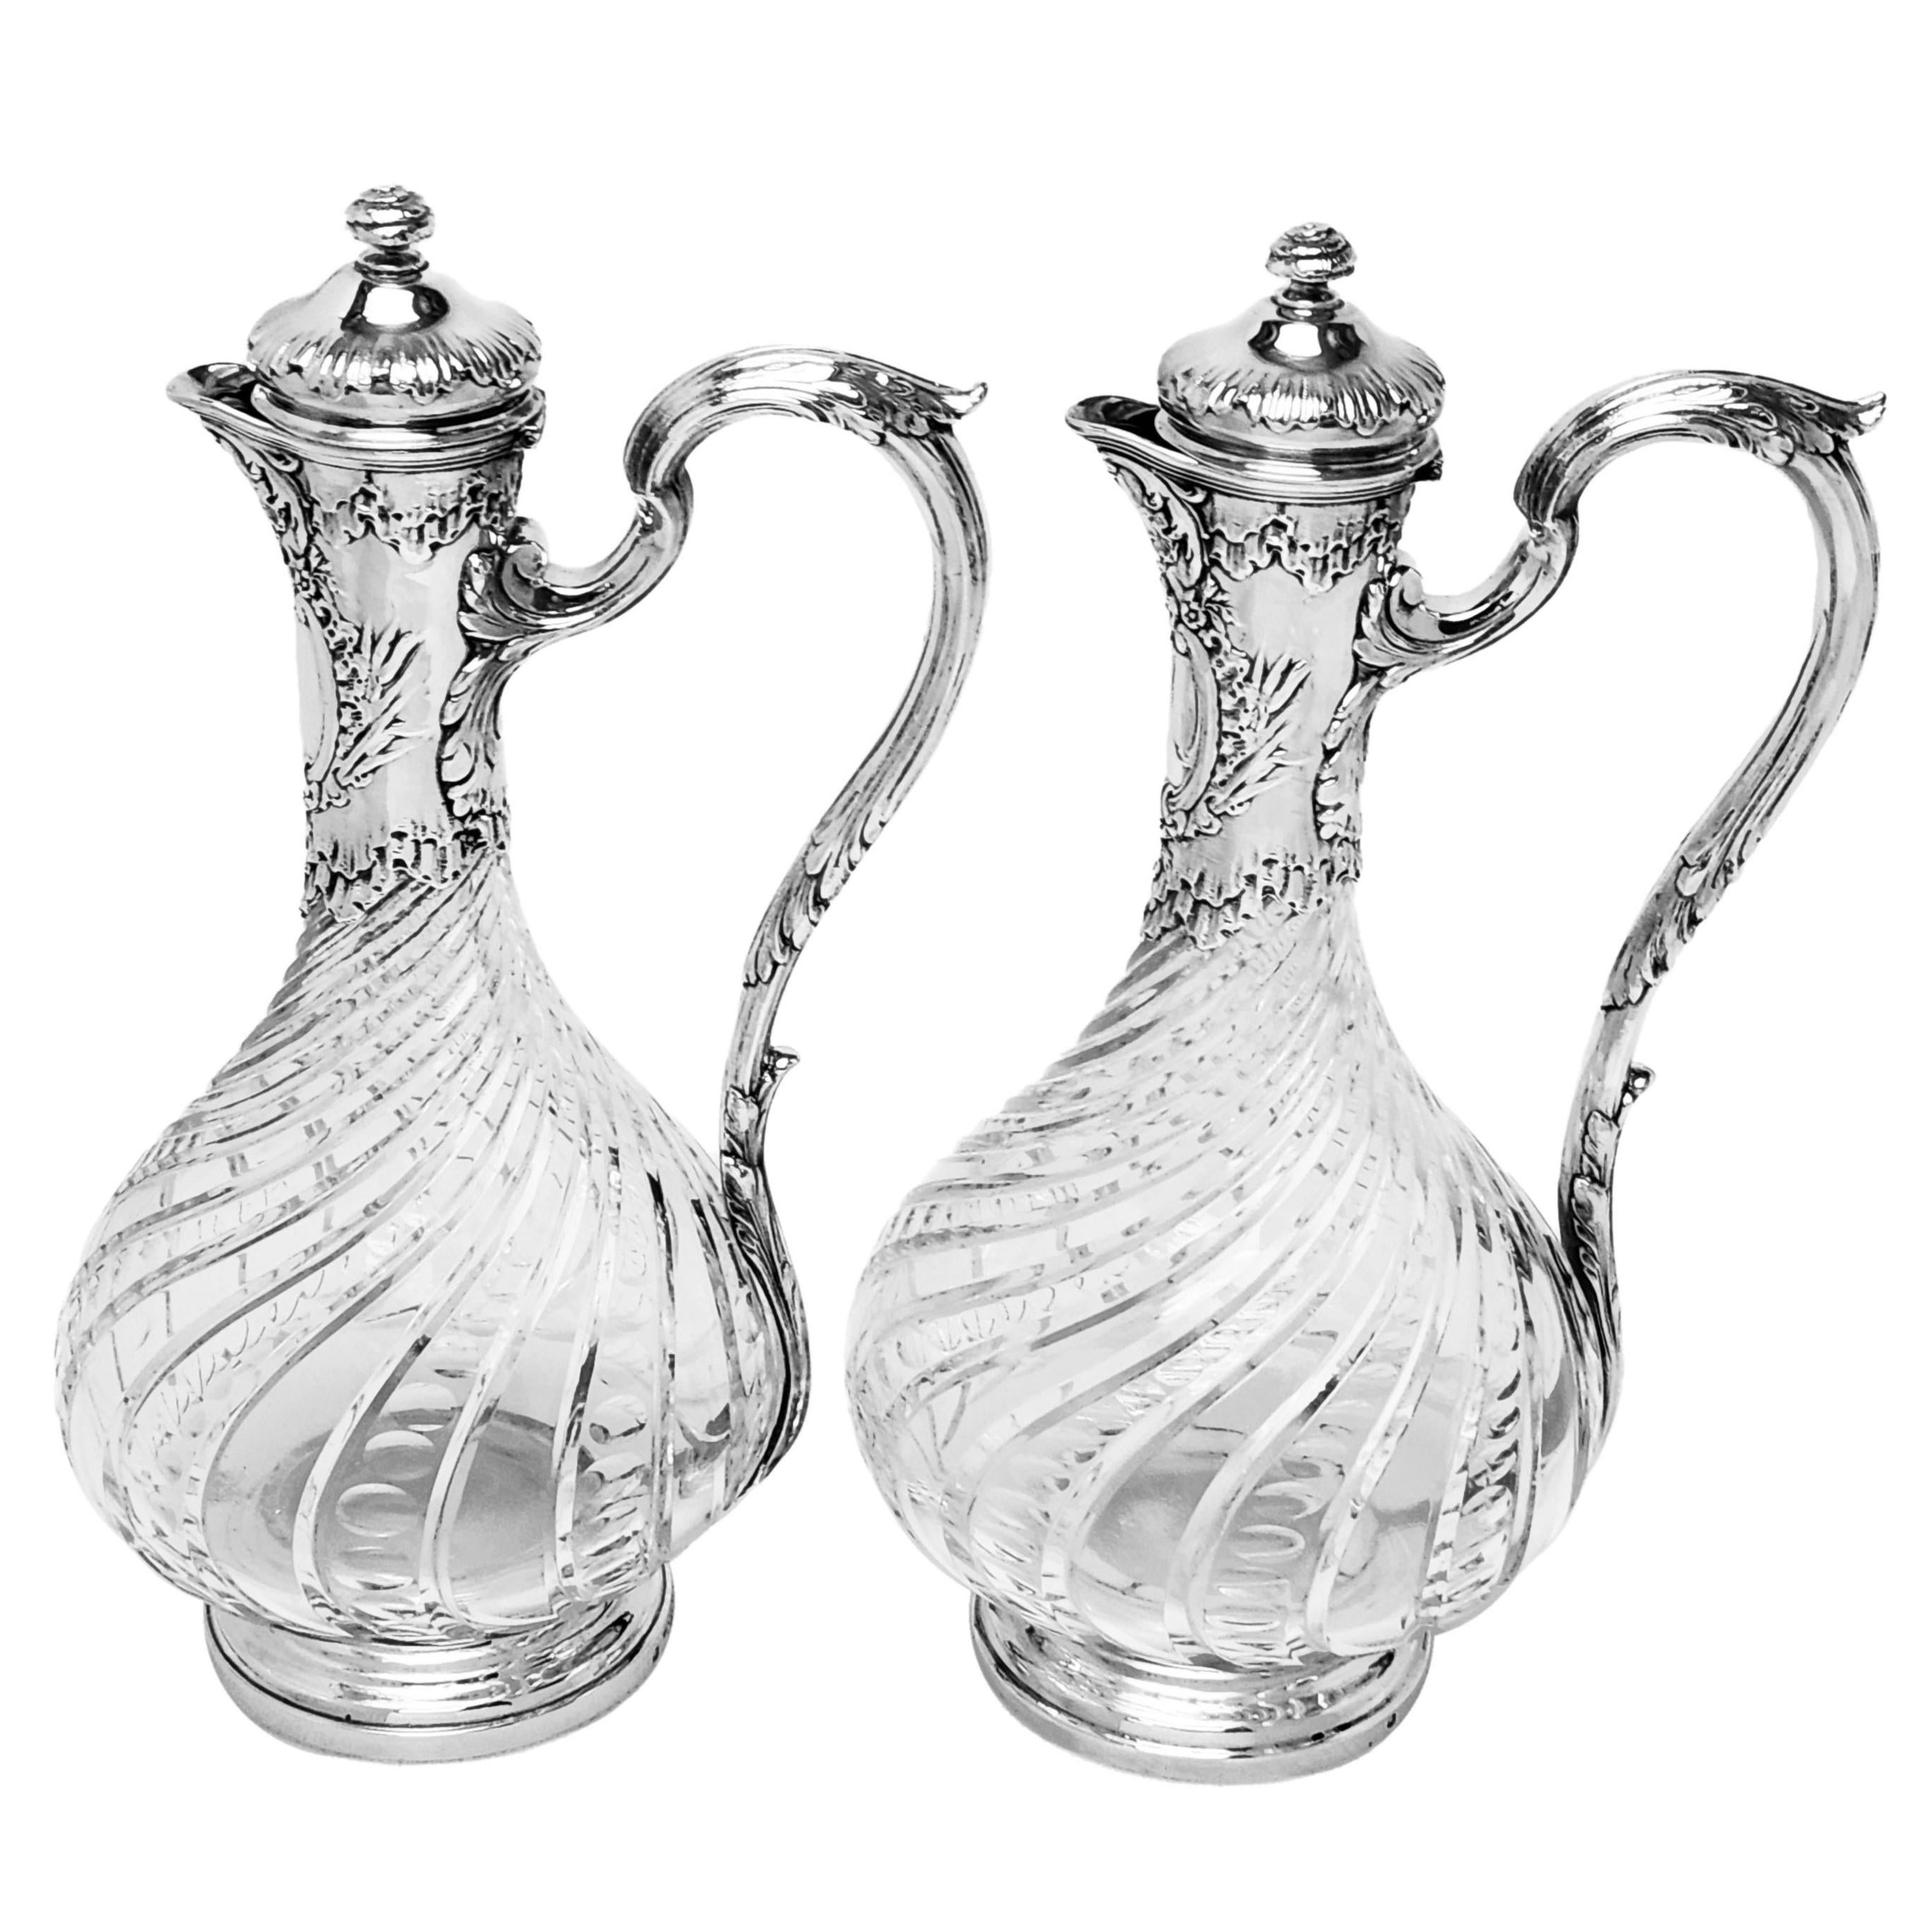 A pair of elegant Antique Silver mounted Glass bodied Claret Jugs made in Paris, France. This pair of Wine Jugs has an ornate chased and engraved Neck and lid with a shaped cartouche below the spout. The Body of each Jug is decorated with a writhen